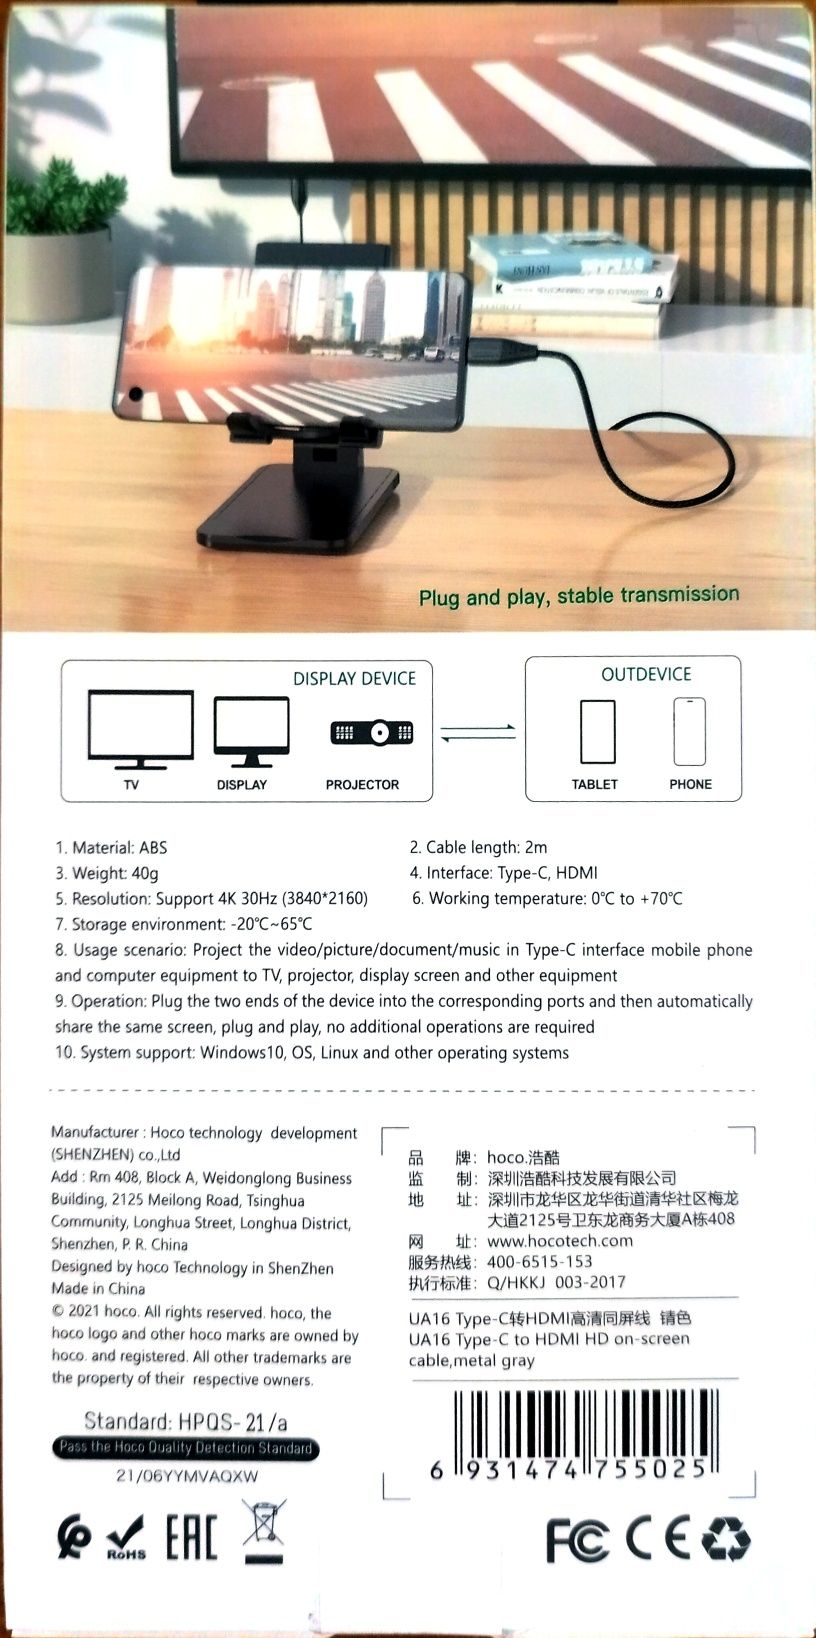 TYPE-C to HDMI. Adapter hd cabel audio & video.